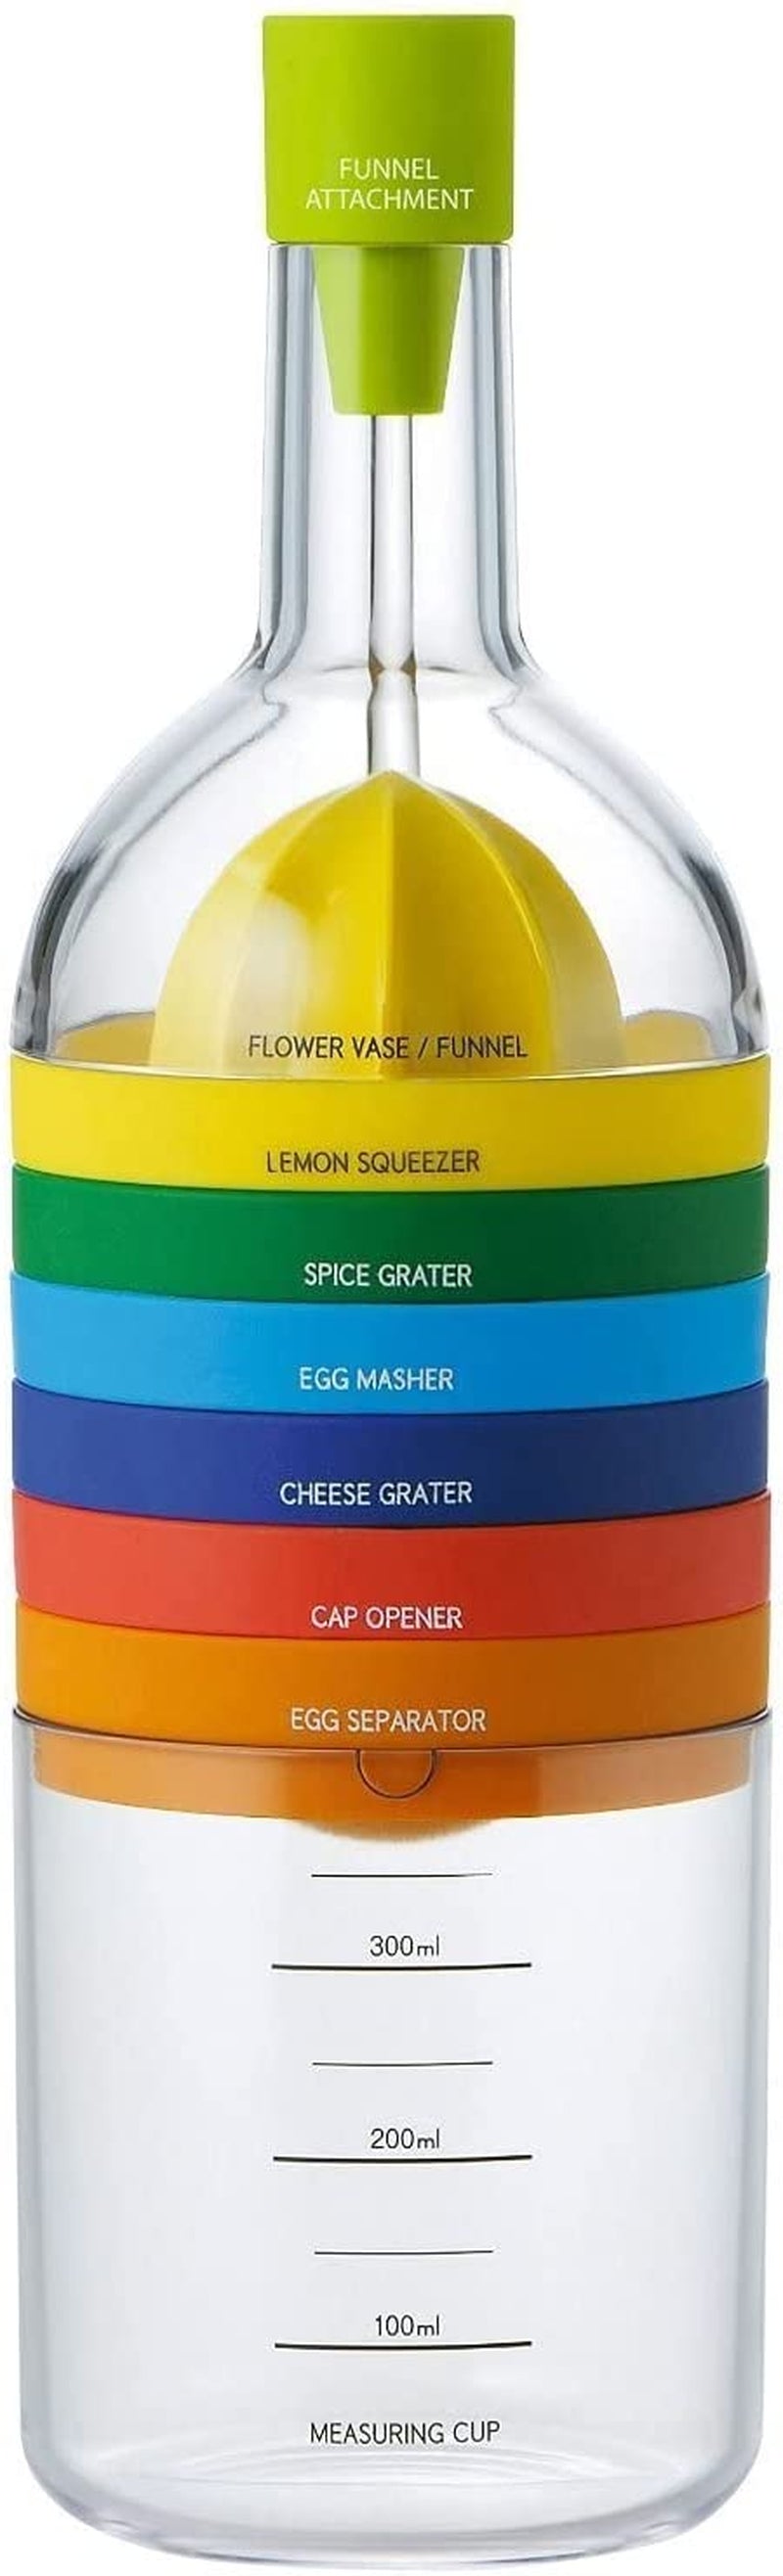 8 in 1 Kitchen Tool, Multipurpose Function Plastic Essential Kitchen Cooking Tools Kitchen Gadget (Funnel, Lemon Squeezer, Egg Seperator,Measuring Cup, Can Opener)